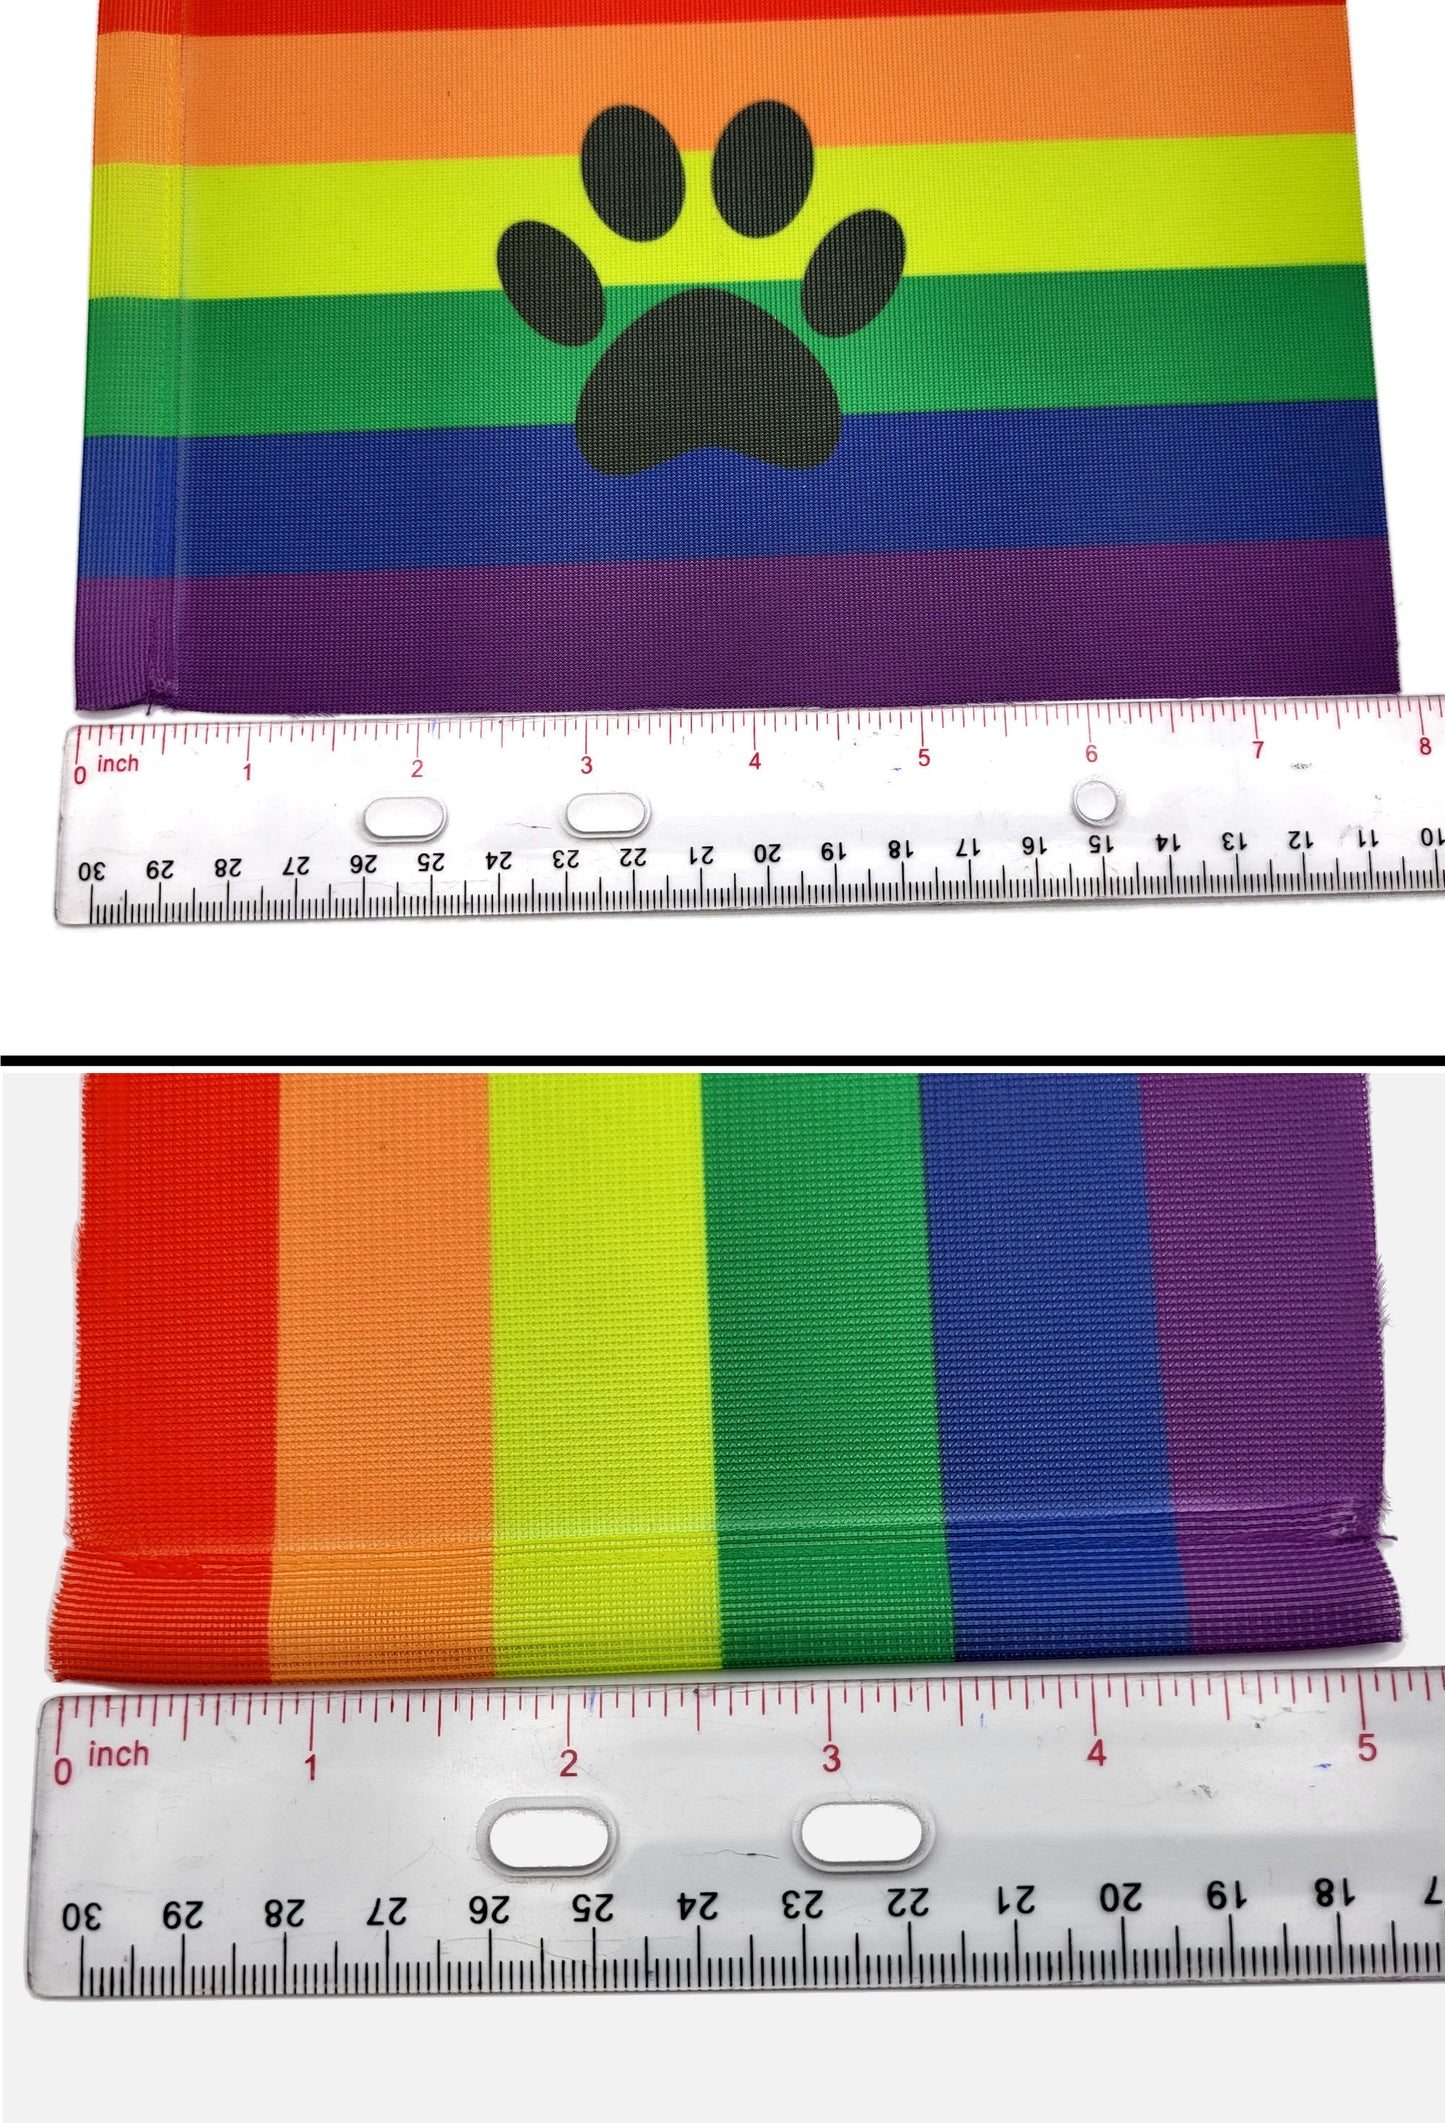 Polyamory Pride Hand/Desk Flags | Choose Your Flag | Double Sided